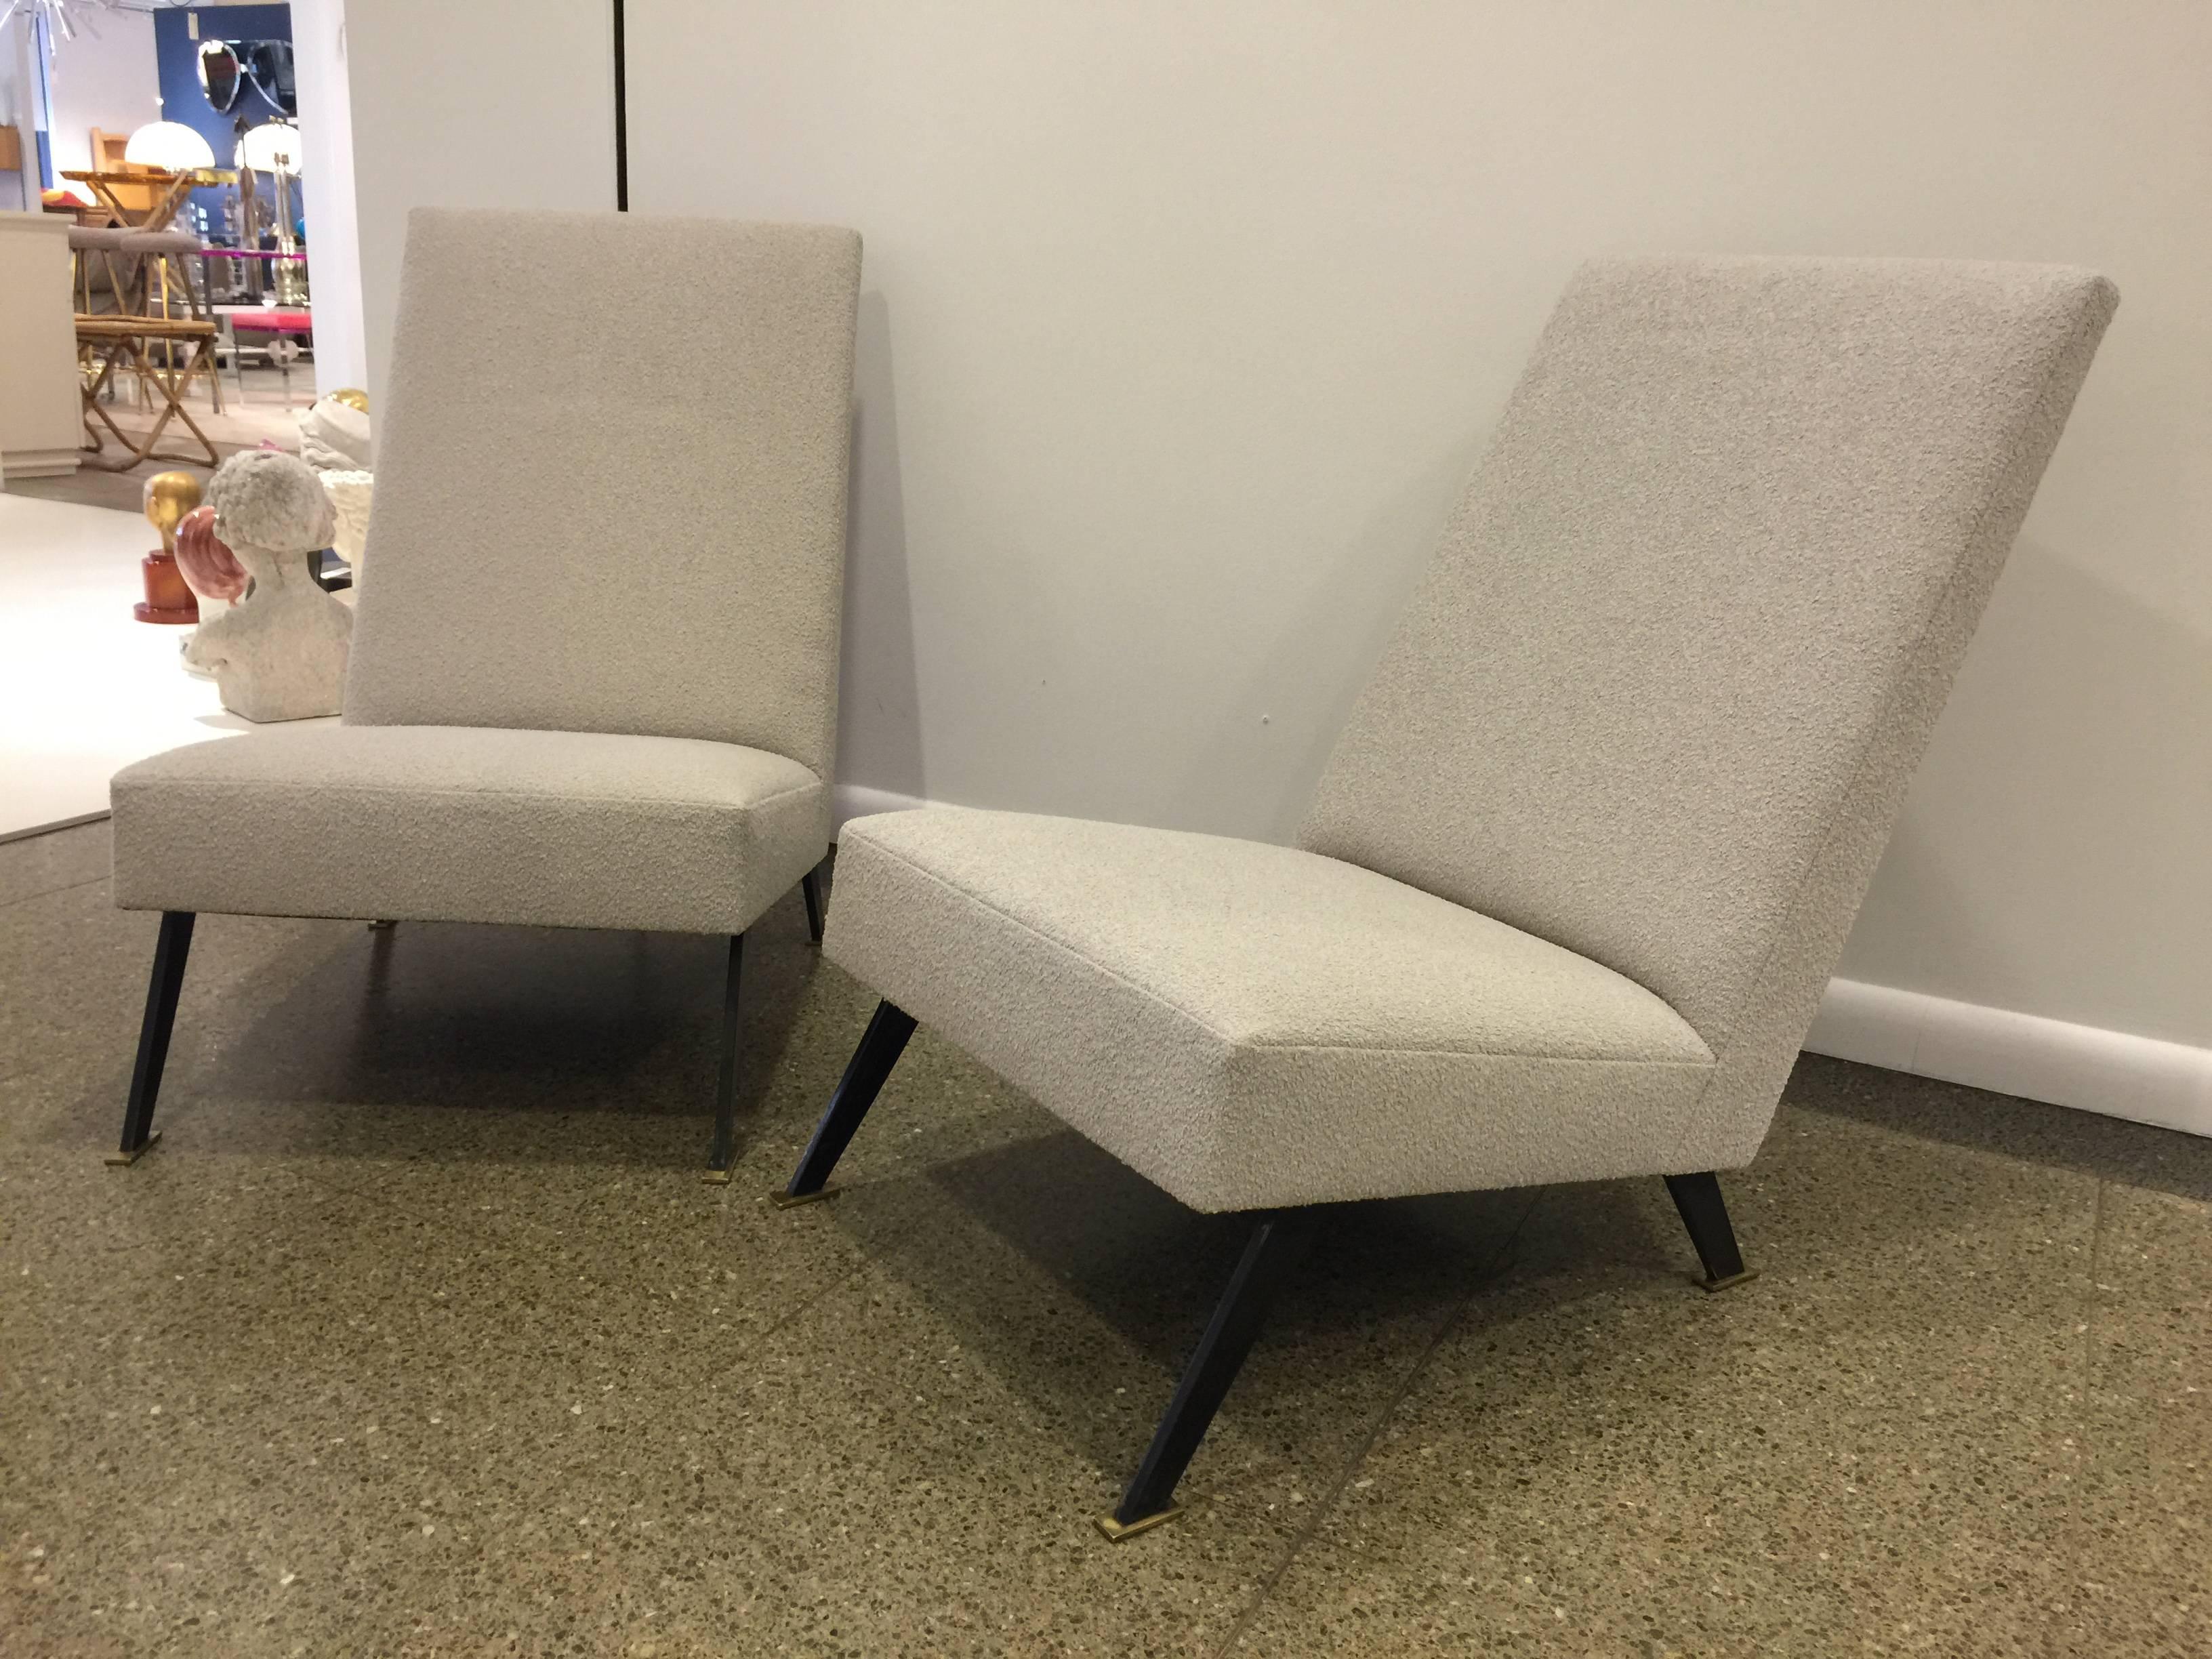 Pair of French Sleek Lounge Chairs In Good Condition For Sale In East Hampton, NY